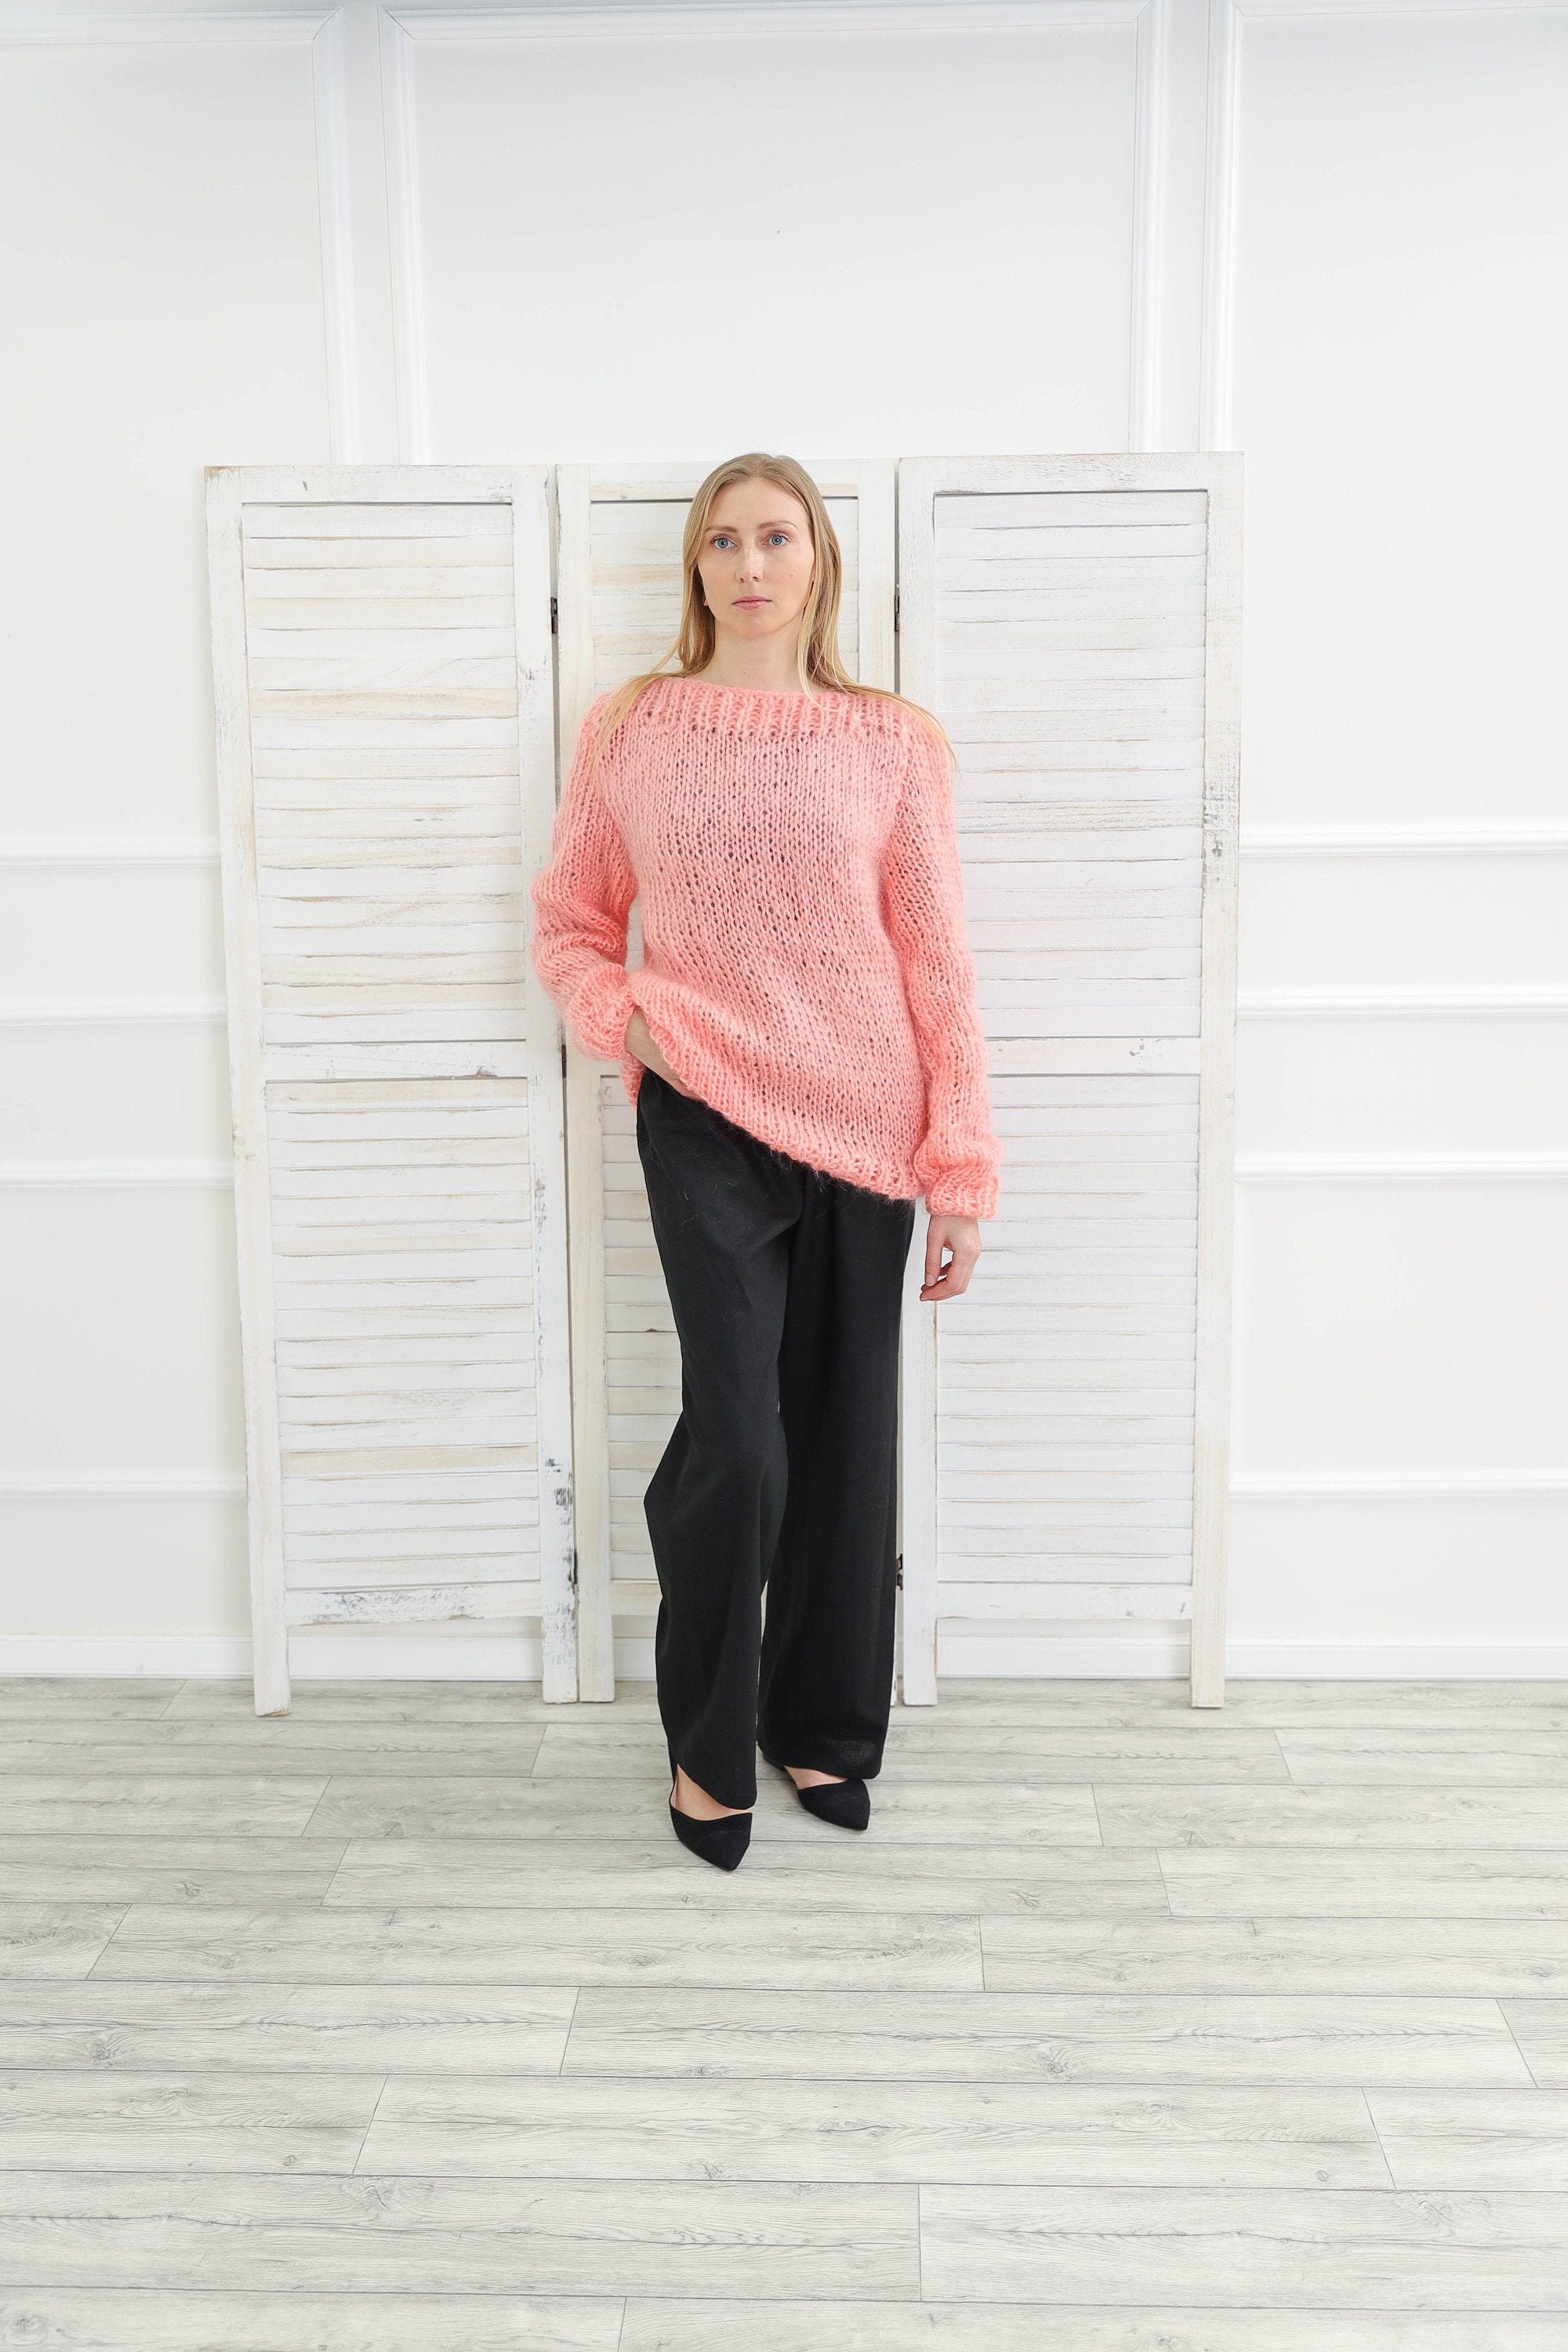 Pink Mohair Sweater, Oversized Hand Knit Long Sleeve Pullover, Winter Cardigan, Women Plus Size Clothing